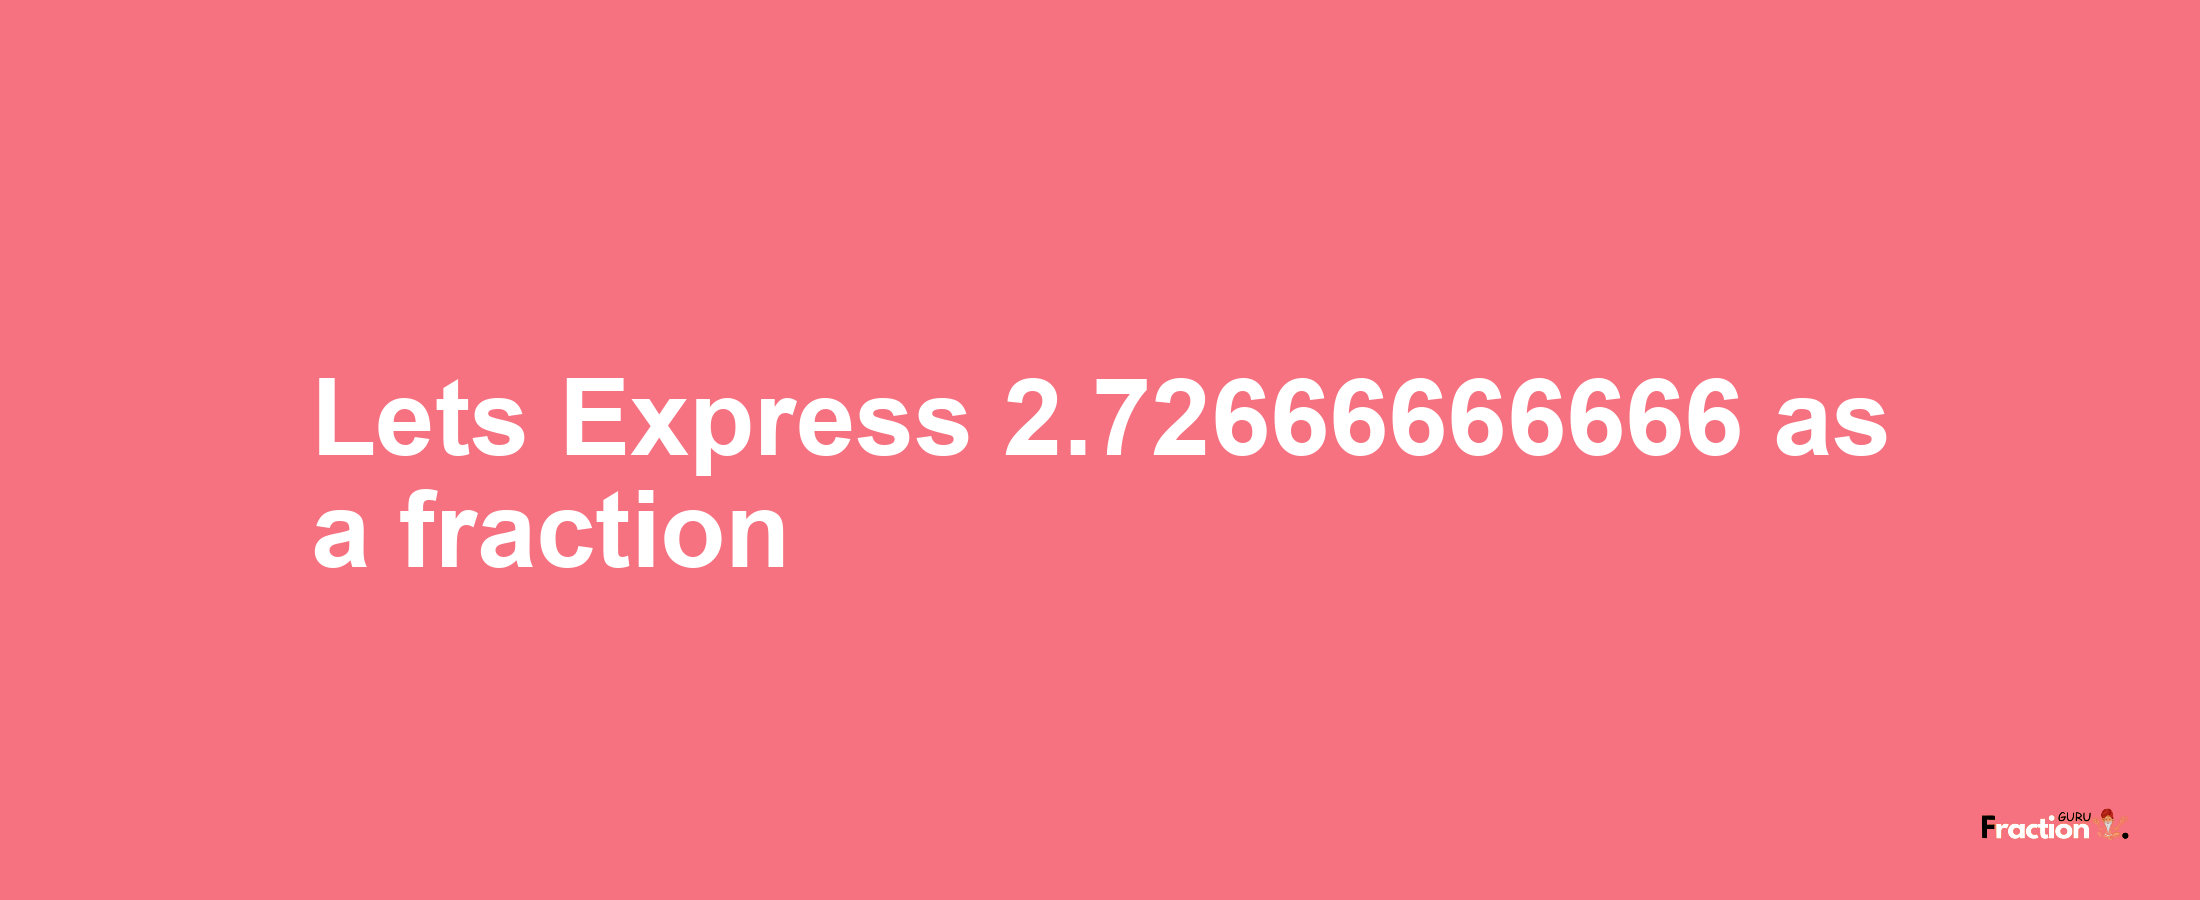 Lets Express 2.72666666666 as afraction